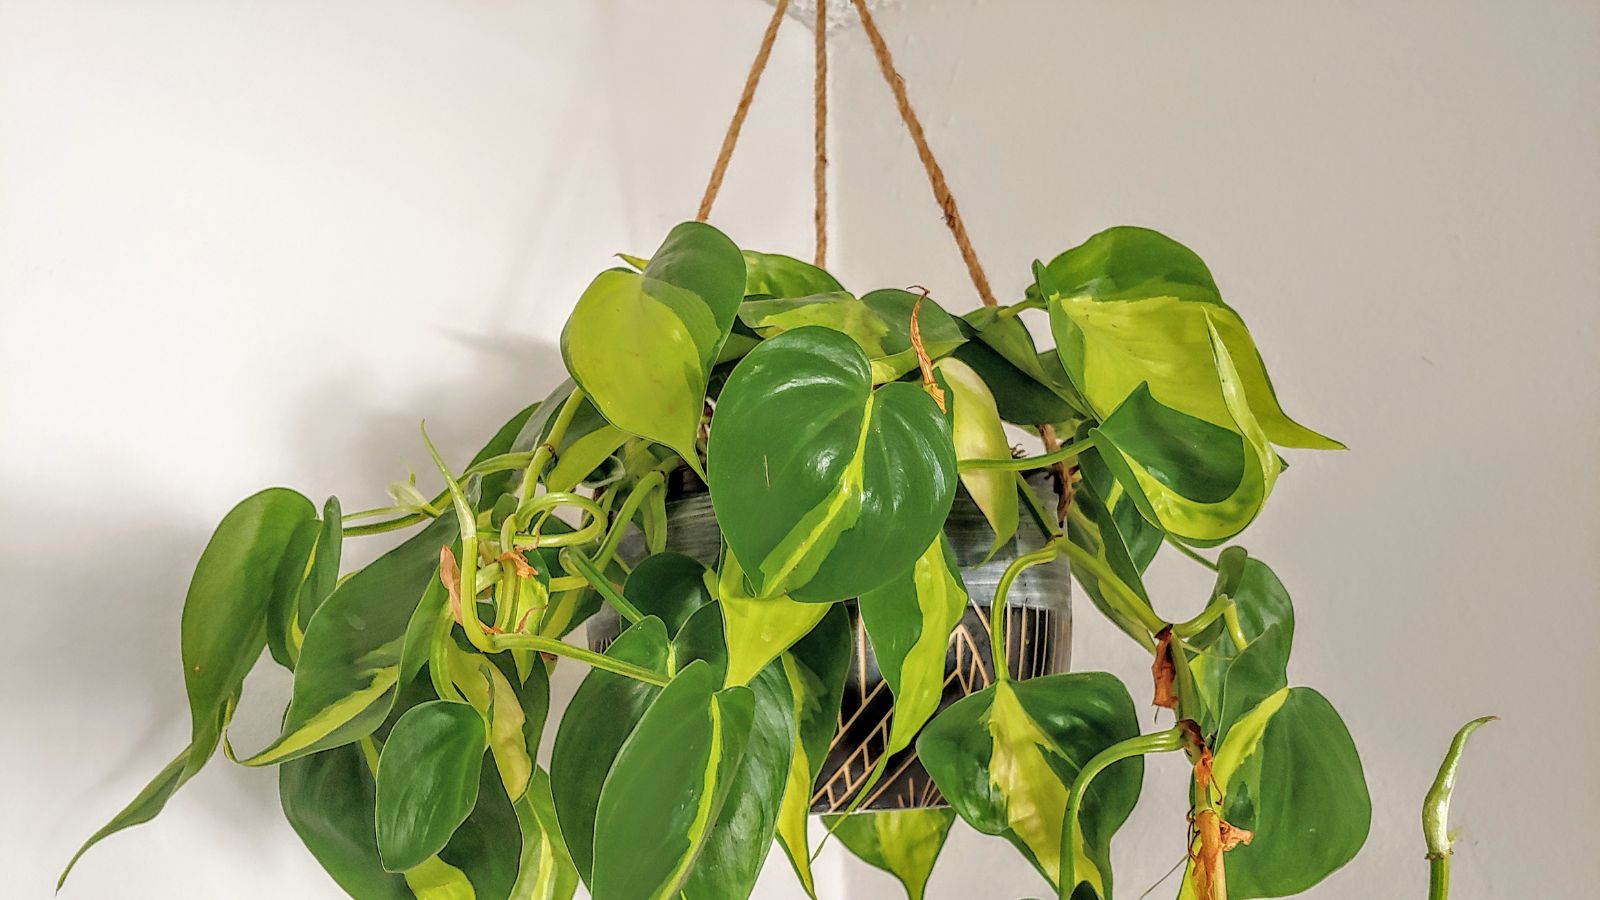 How do you hang plants without drilling walls?
